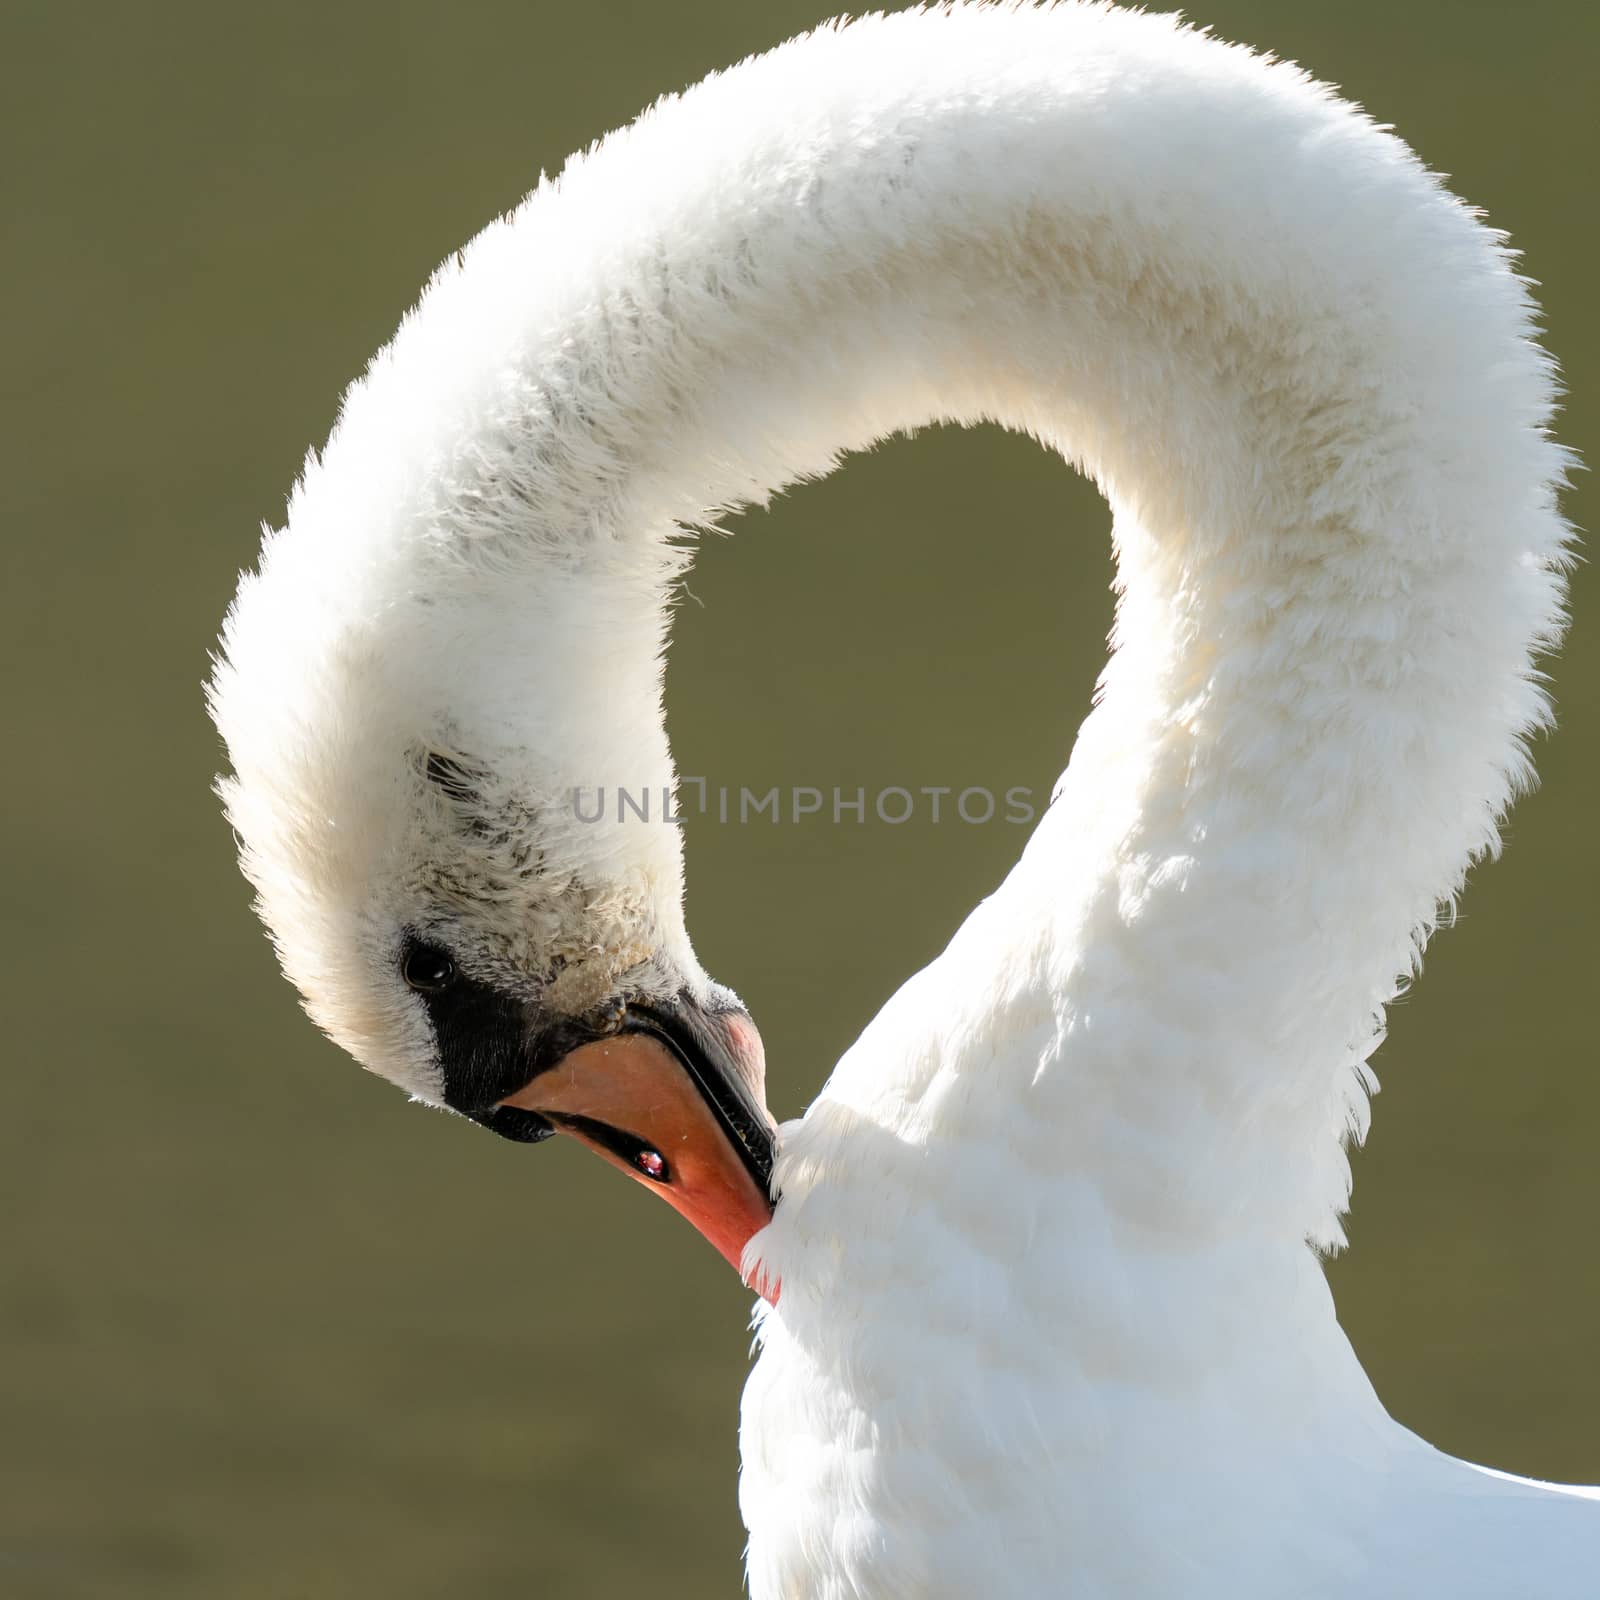 White swan (Cygnus olor), image was taken on the Moselle river close to Cochem, Germany